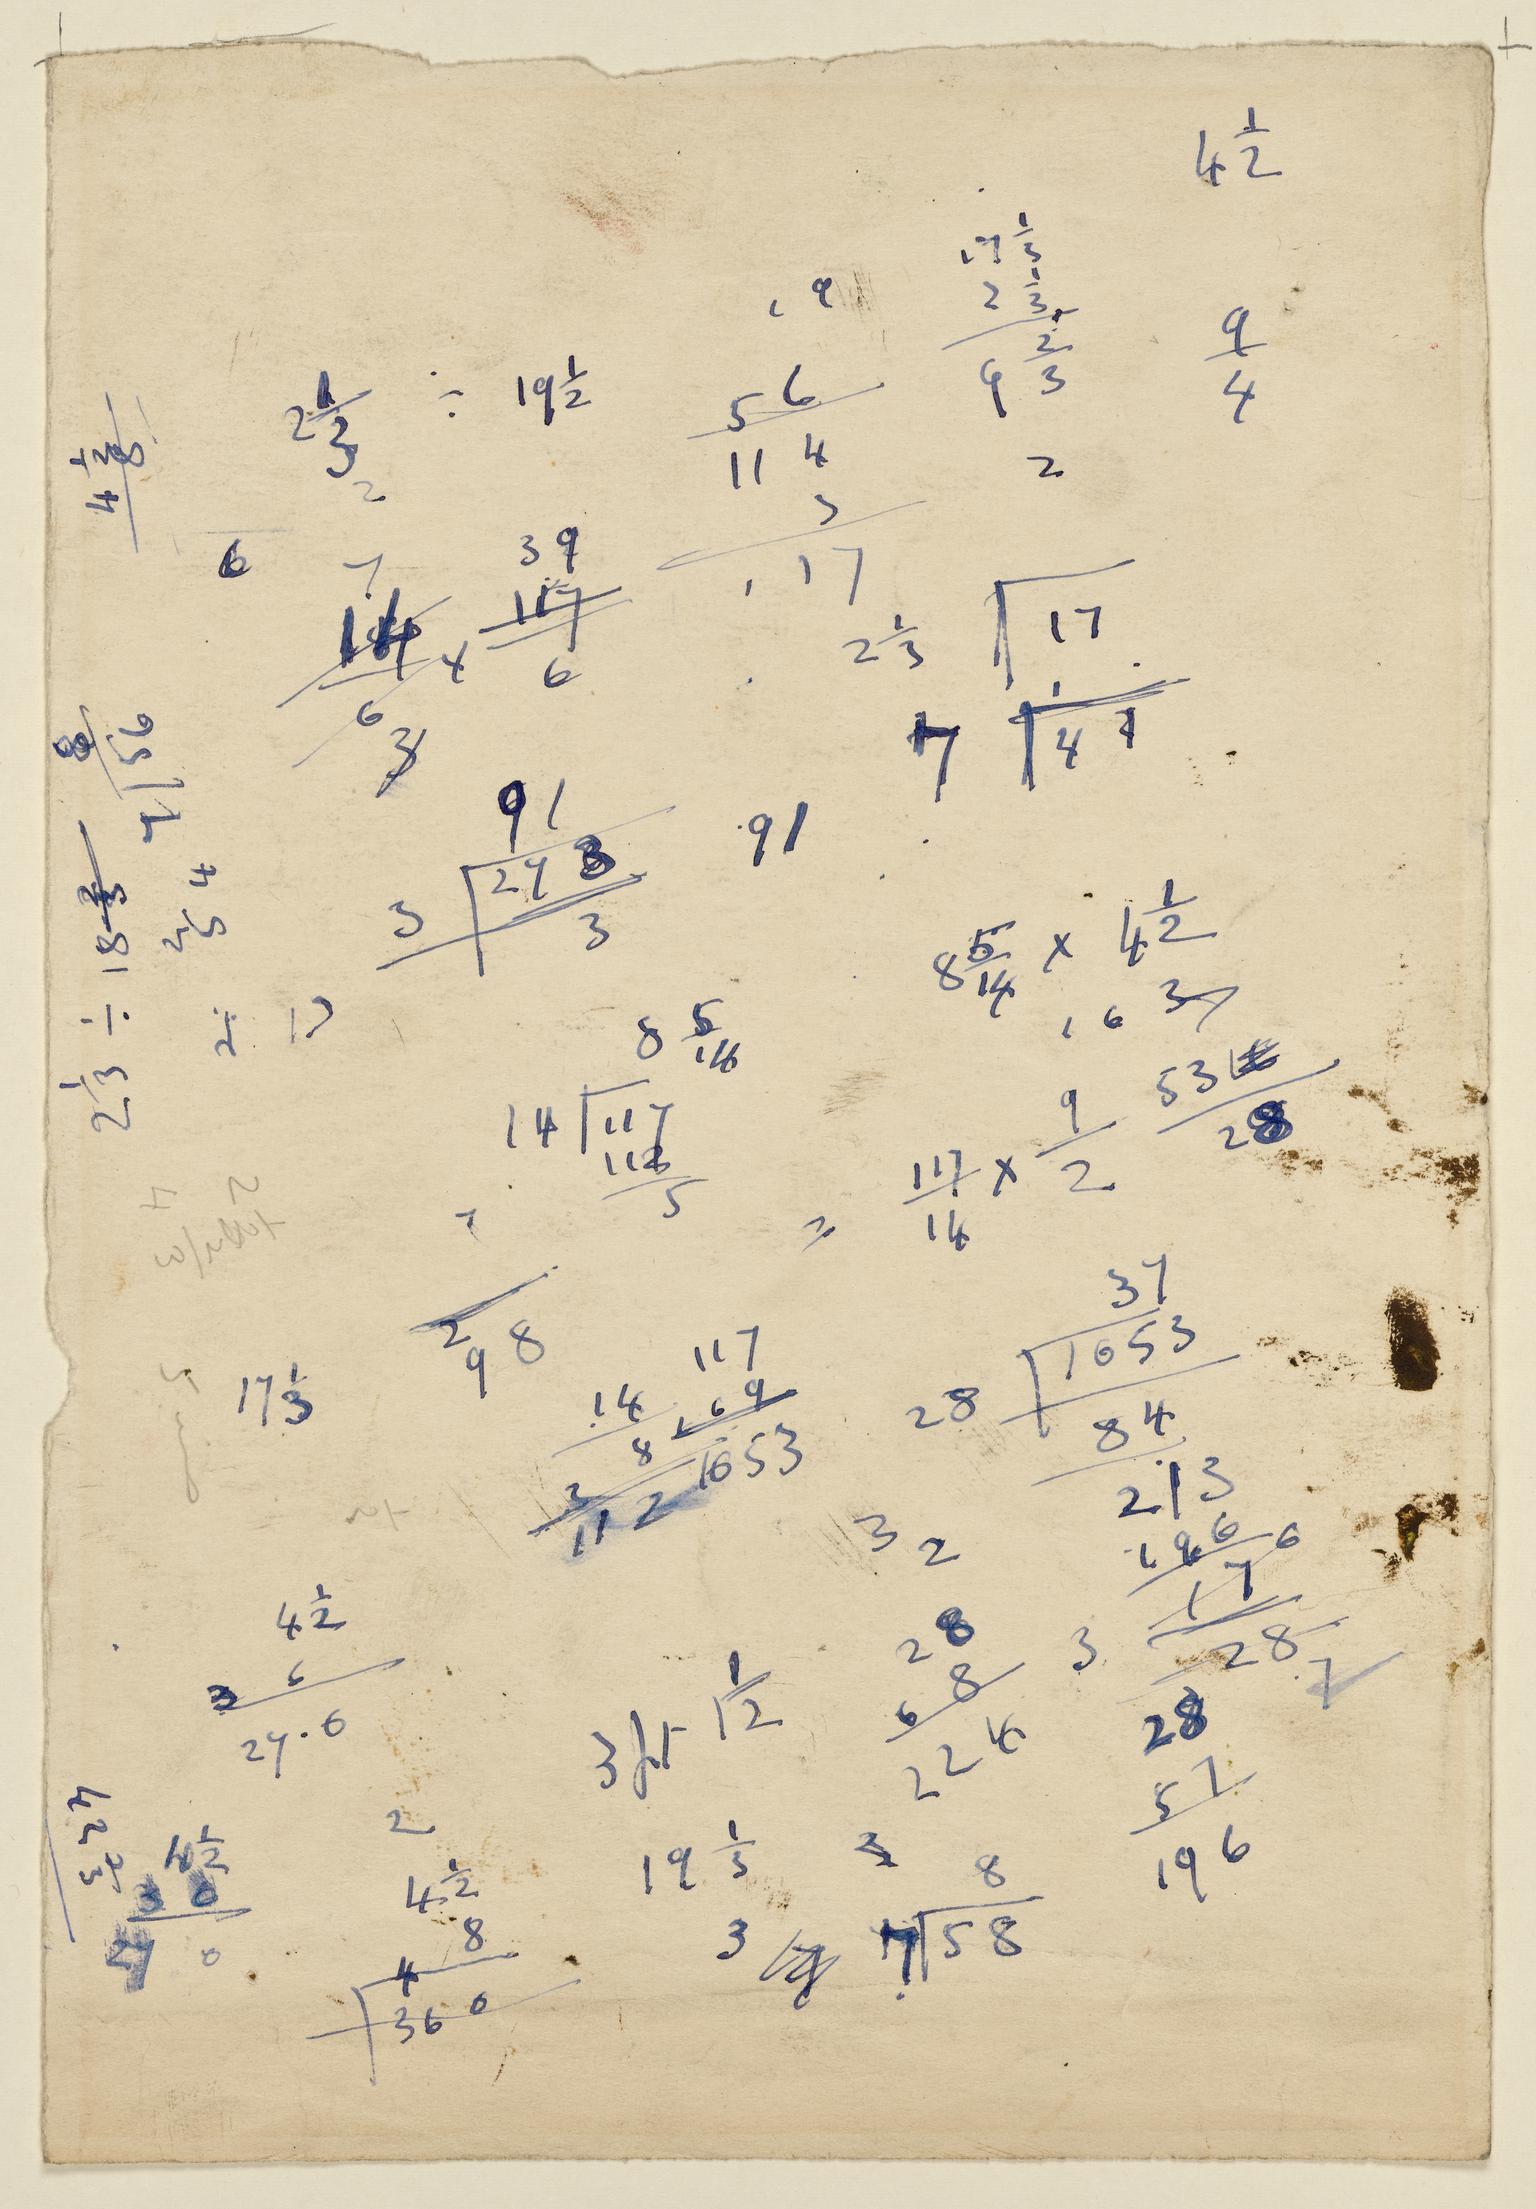 Calculations for "The Musicians"